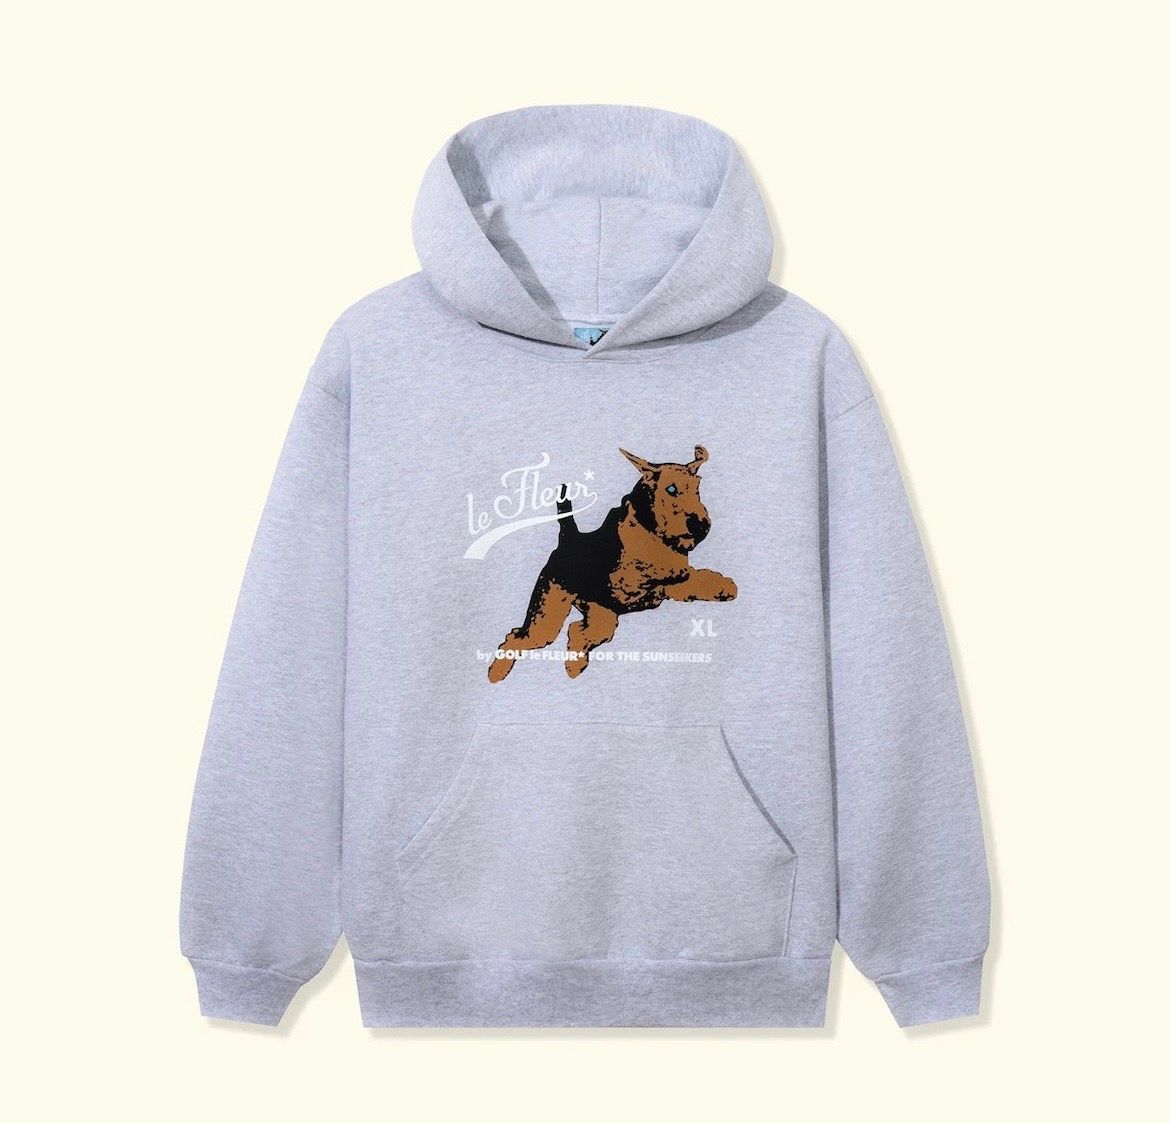 Pre-owned Golf Le Fleur X Golf Wang Golf Le Fleur Darryl Dog Hoodie Size Large In White